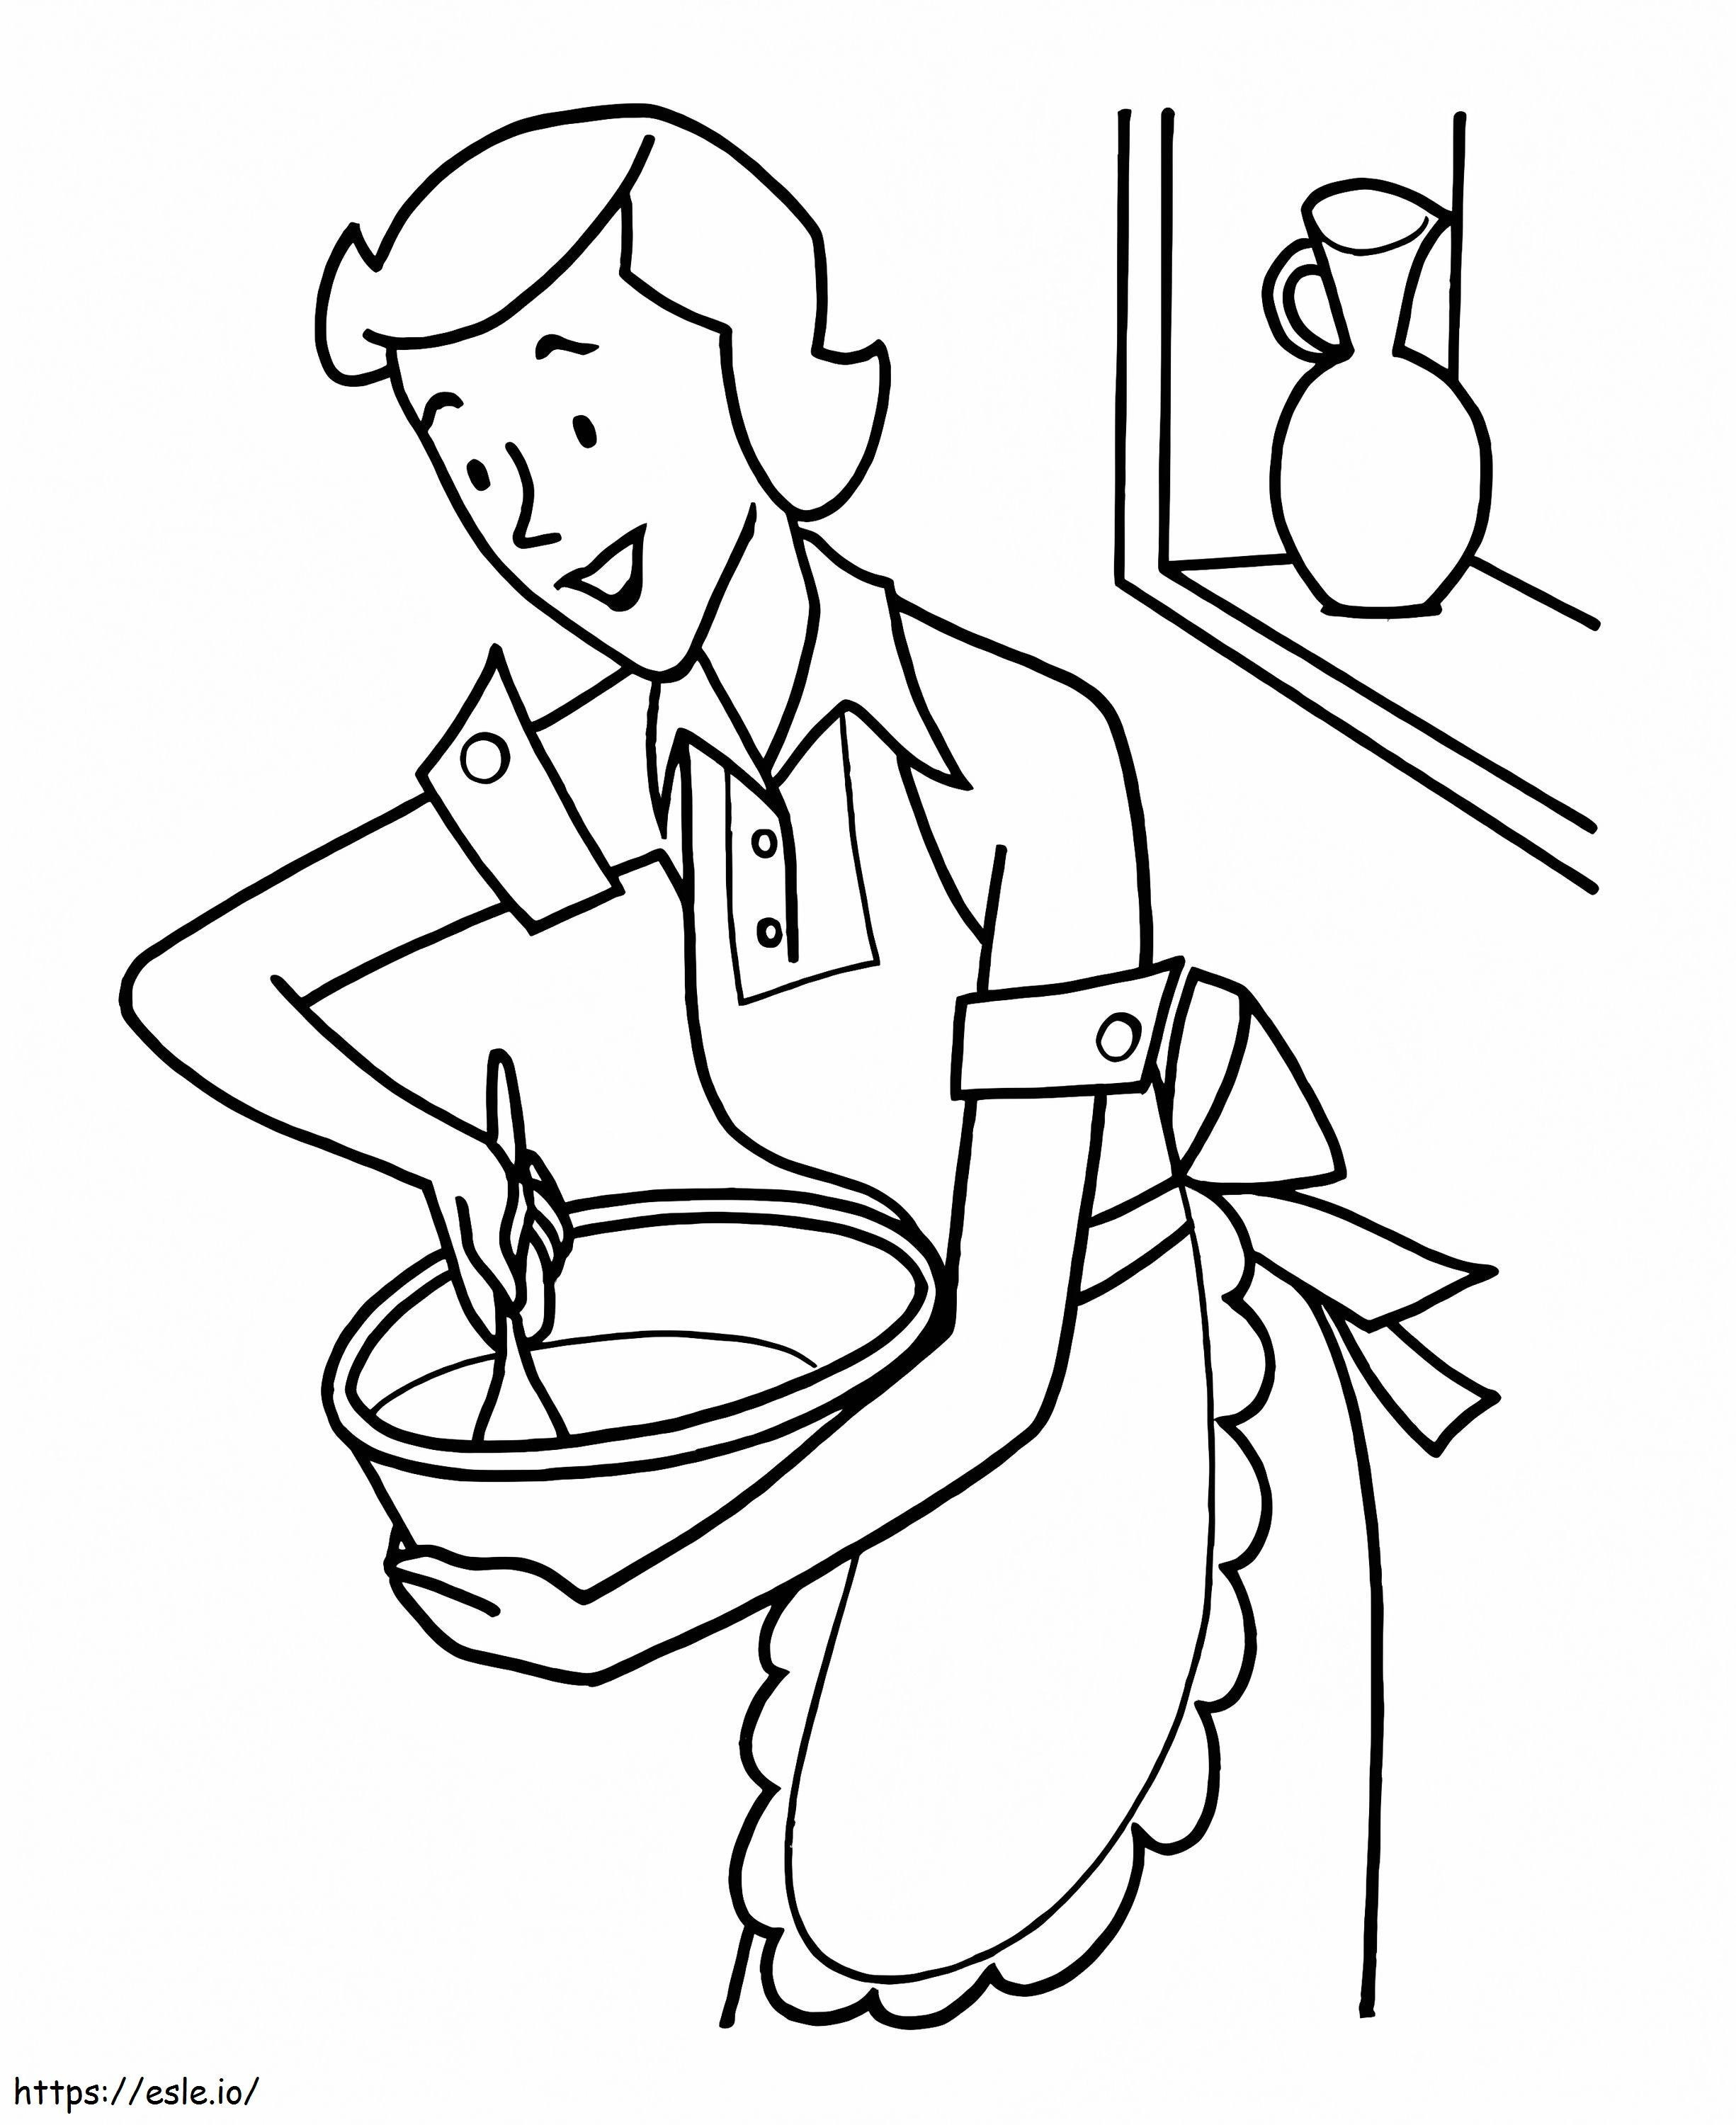 Mom Making Cookies coloring page